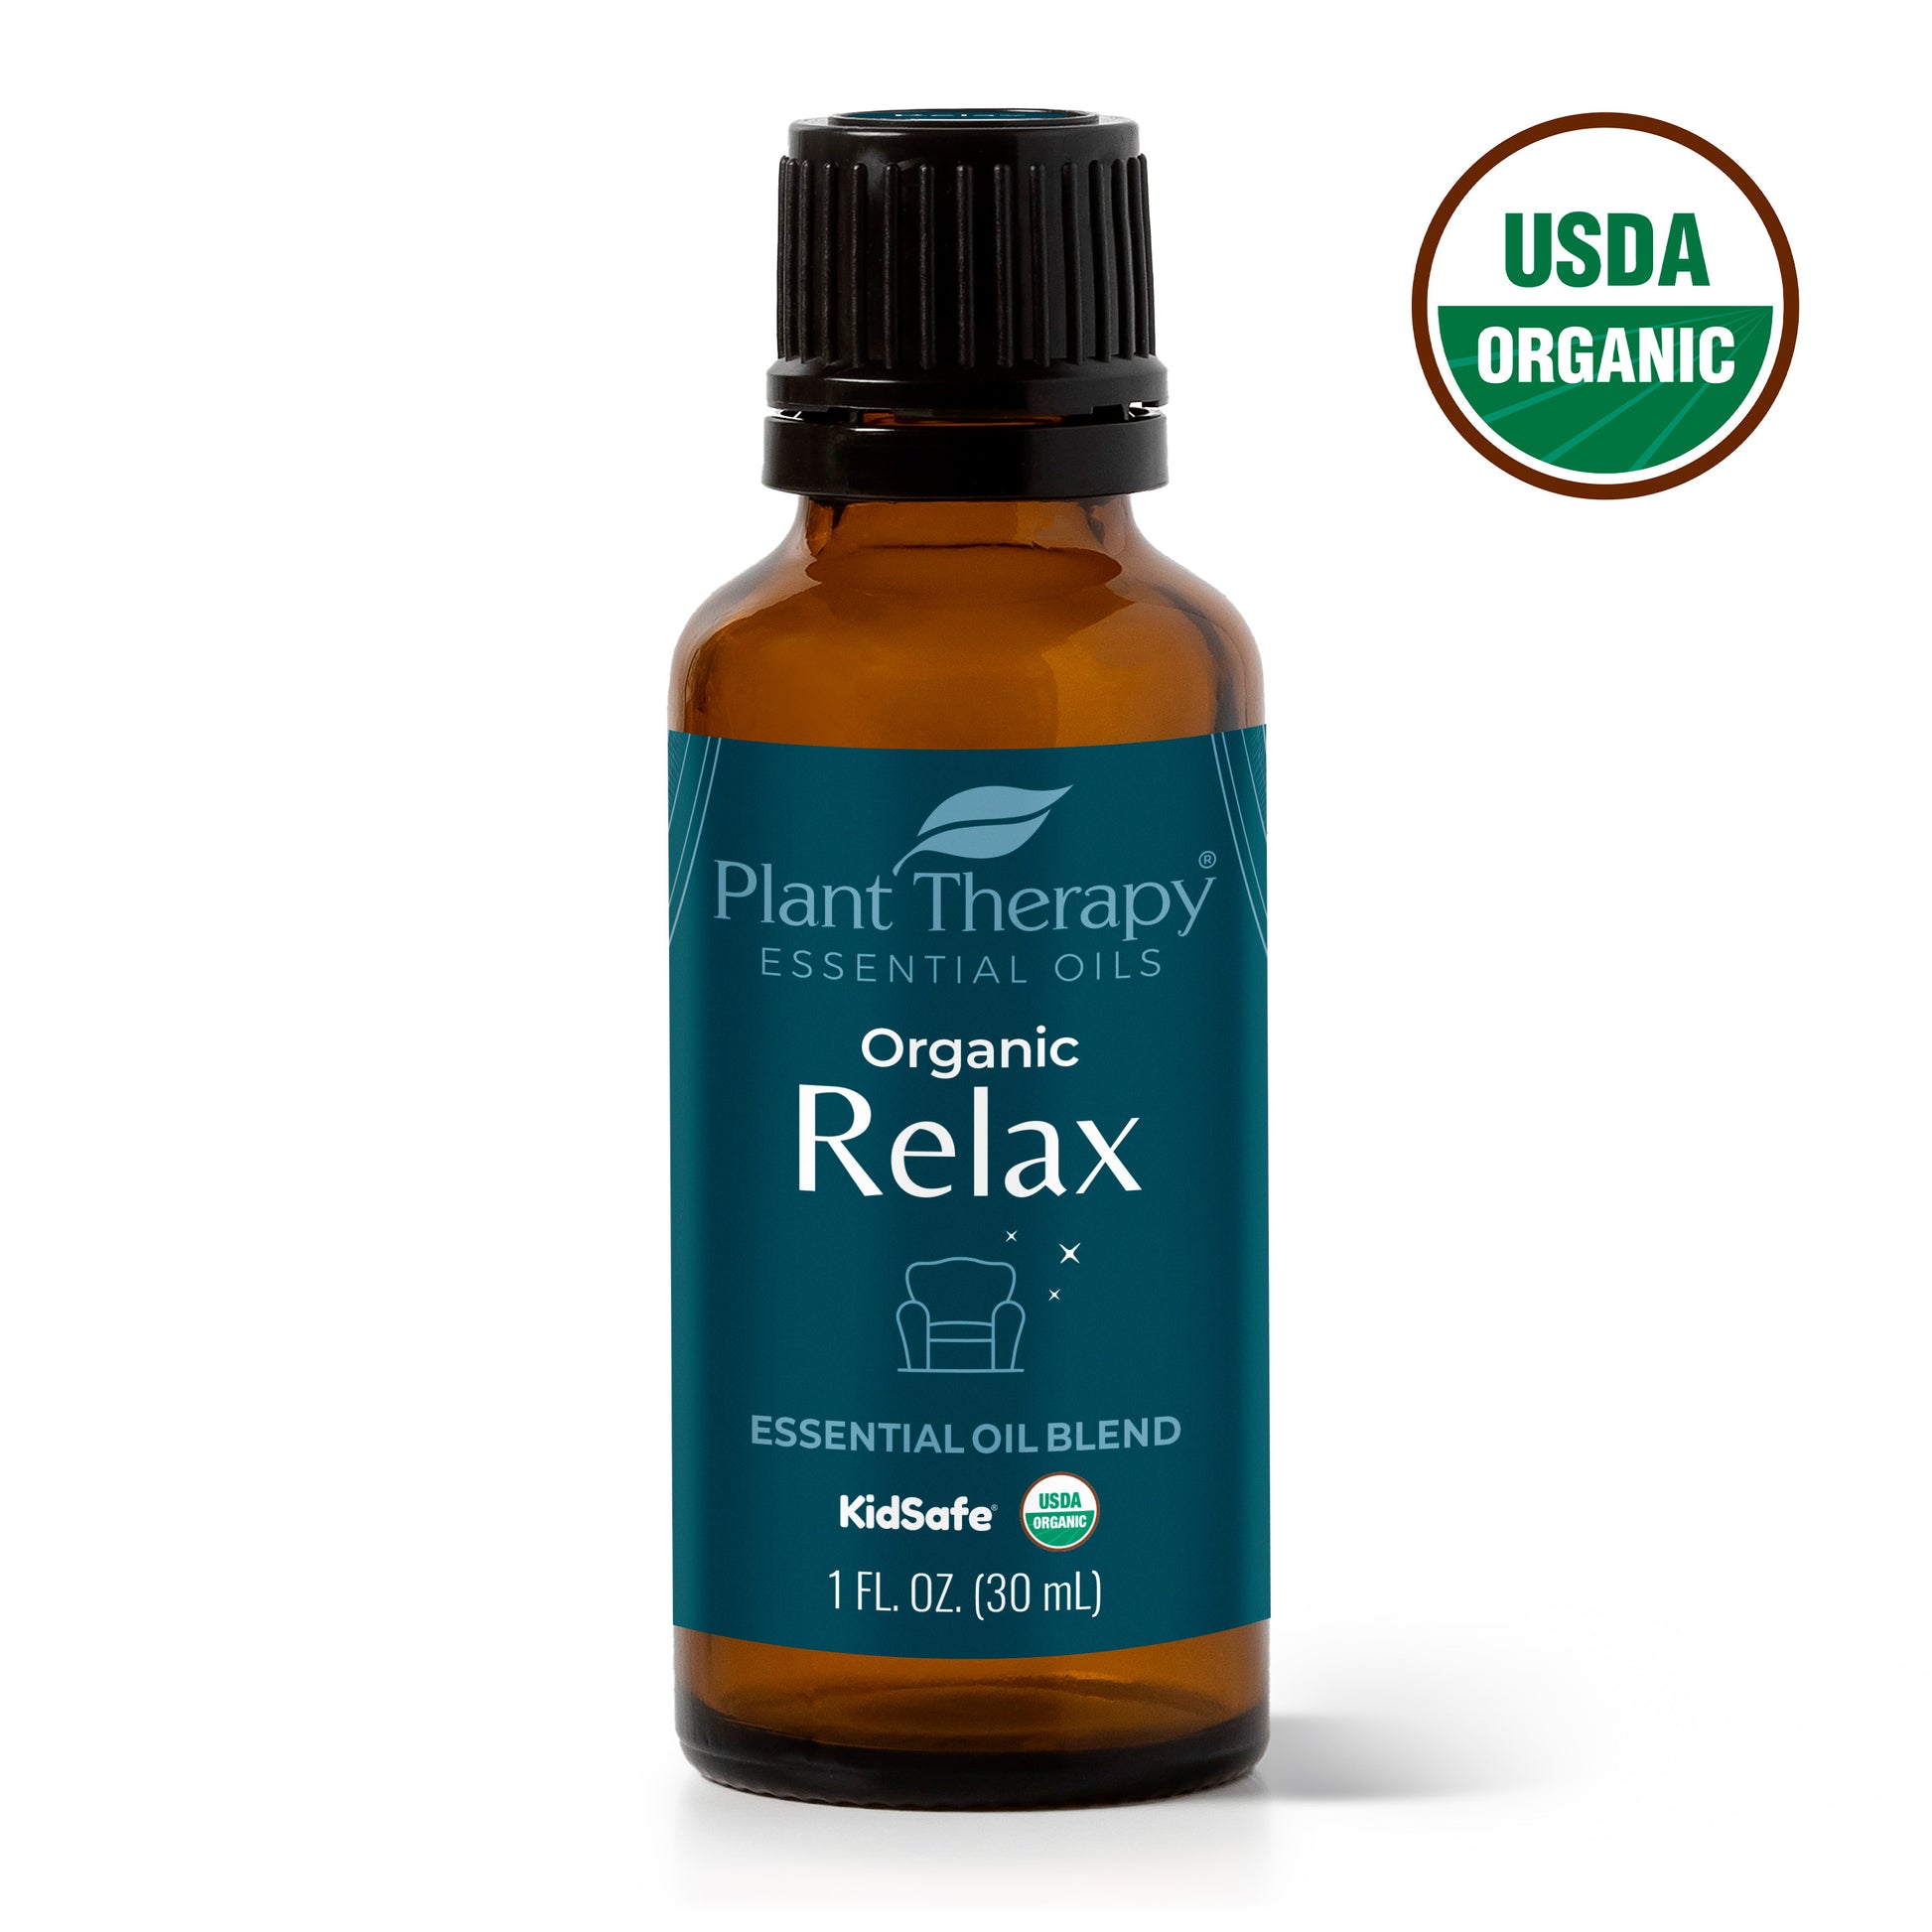 Plant Therapy Organic Relax Essential Oil Blend 100% Pure, Undiluted, Natural Aromatherapy, Therapeutic Grade 30 ml (1 oz)